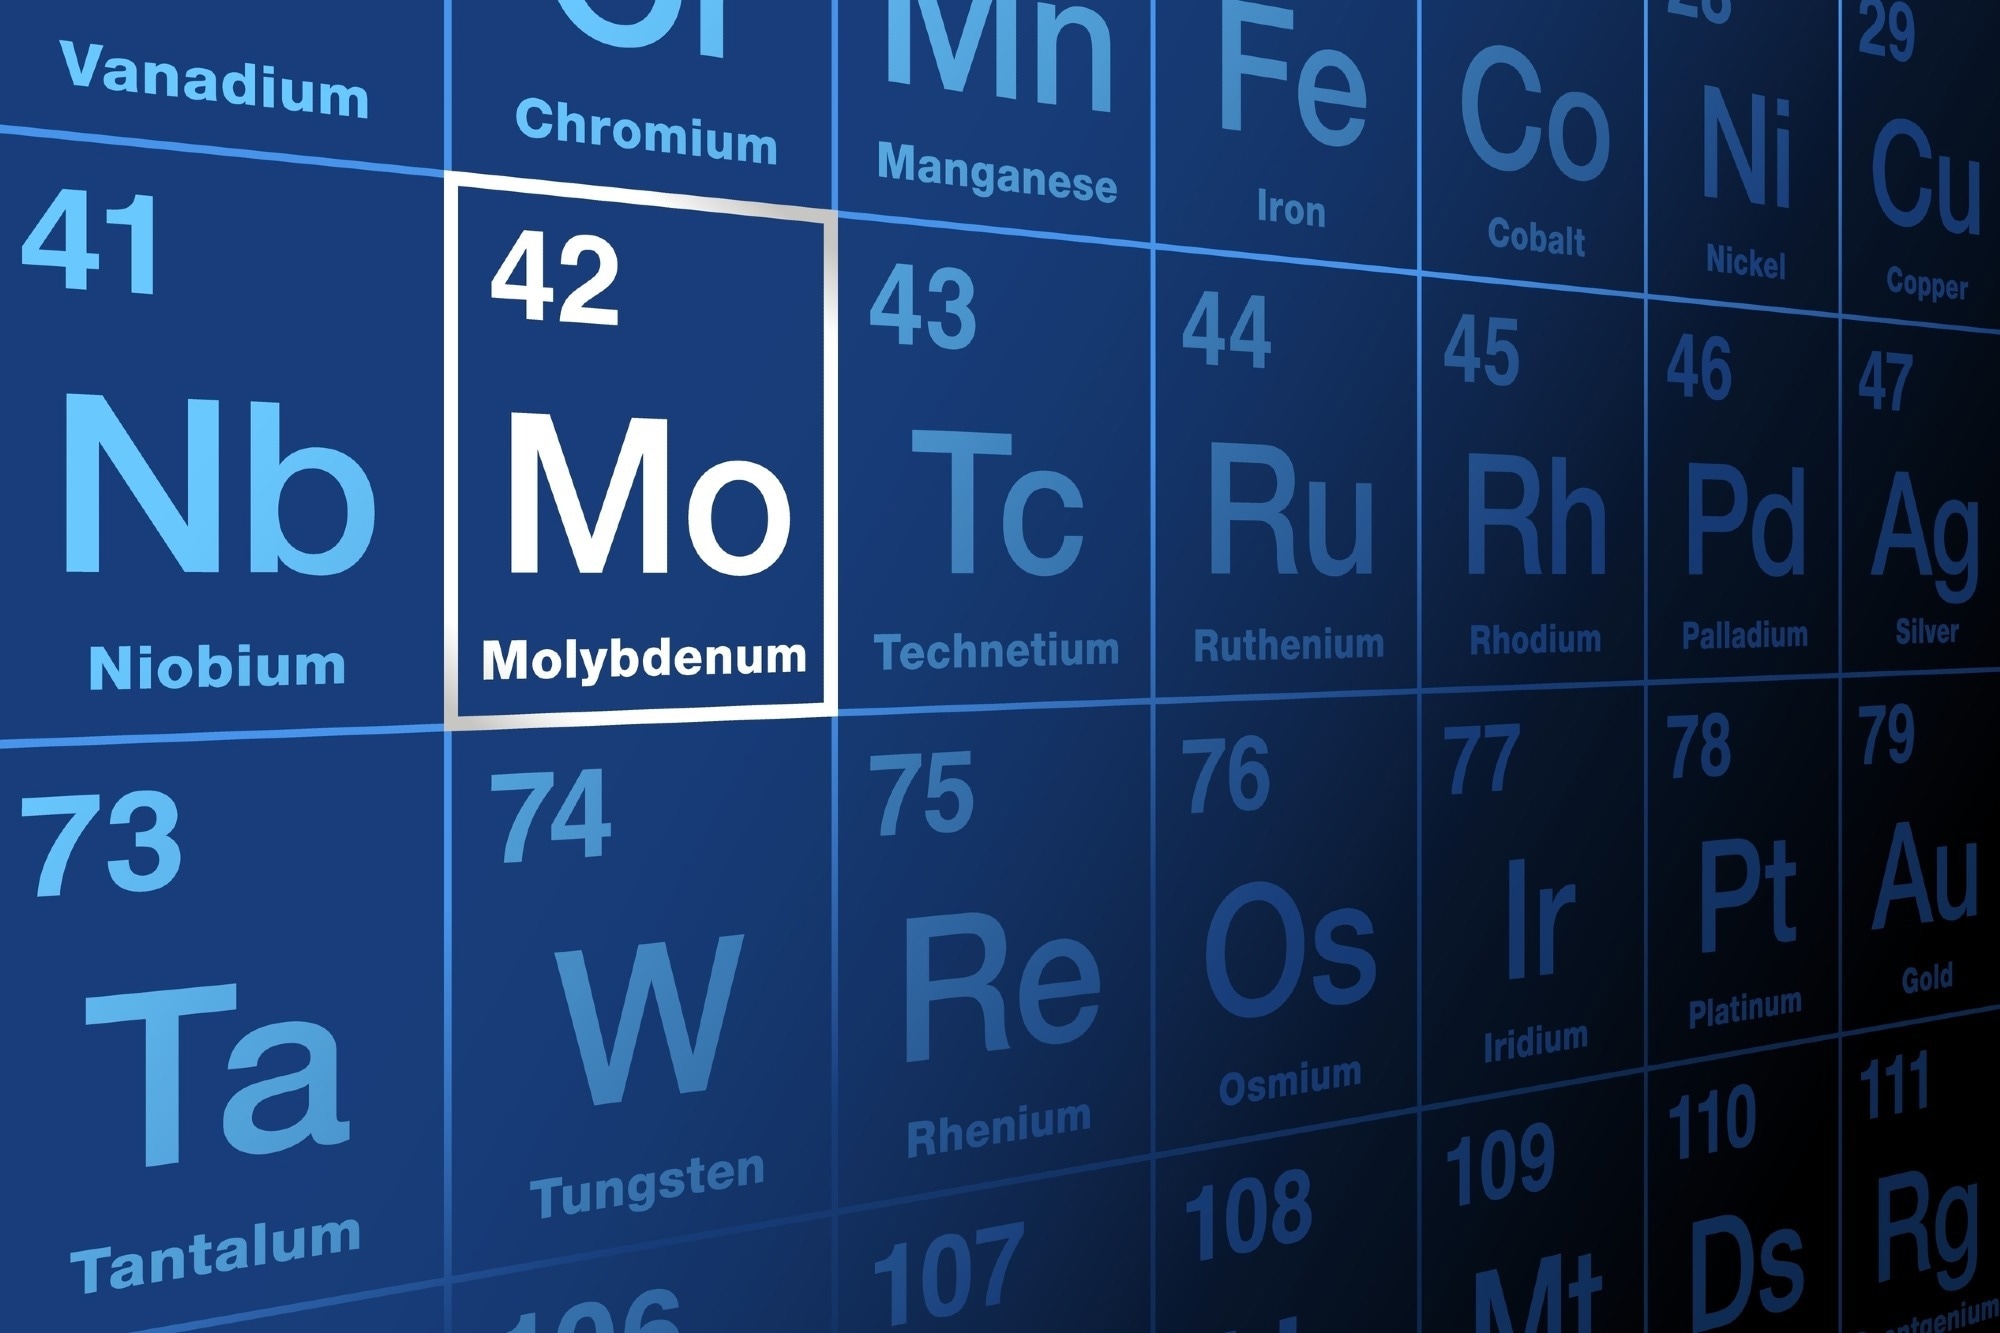 Molybdenum on periodic table of the elements. Metal and chemical element with symbol Mo and atomic number 42.